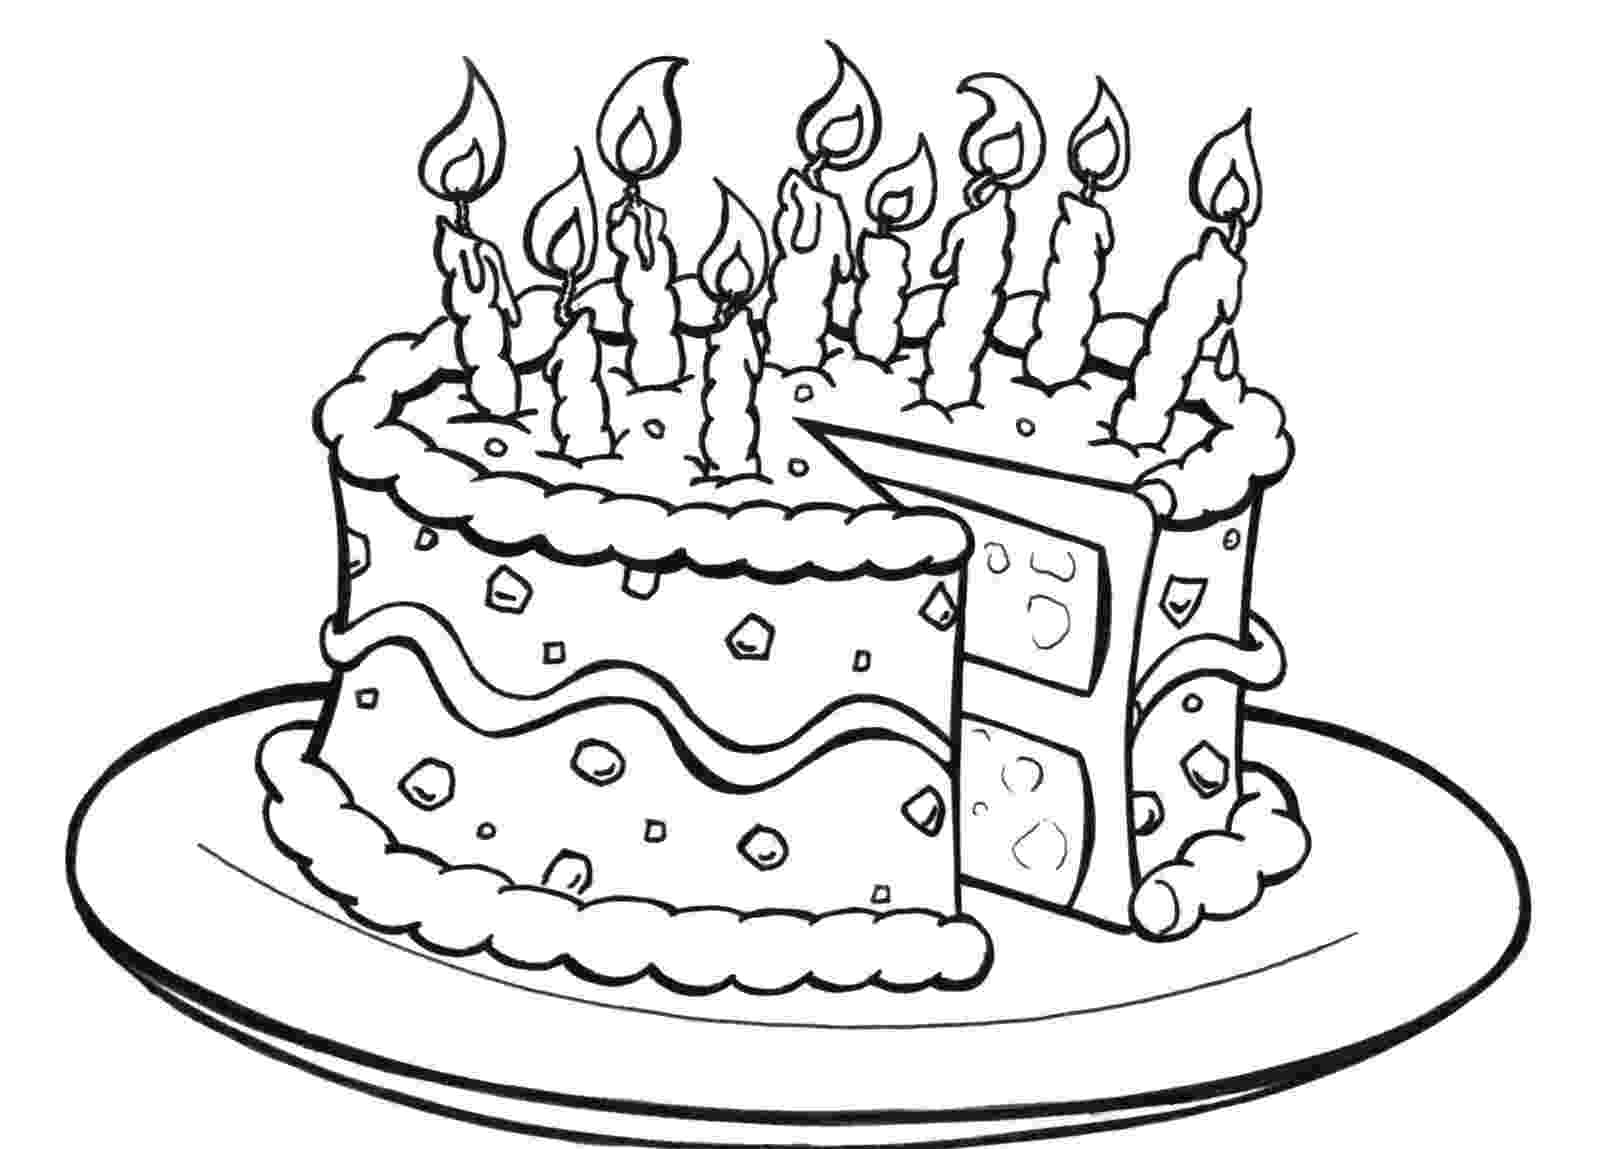 colouring picture cake free printable birthday cake coloring pages for kids cake colouring picture 